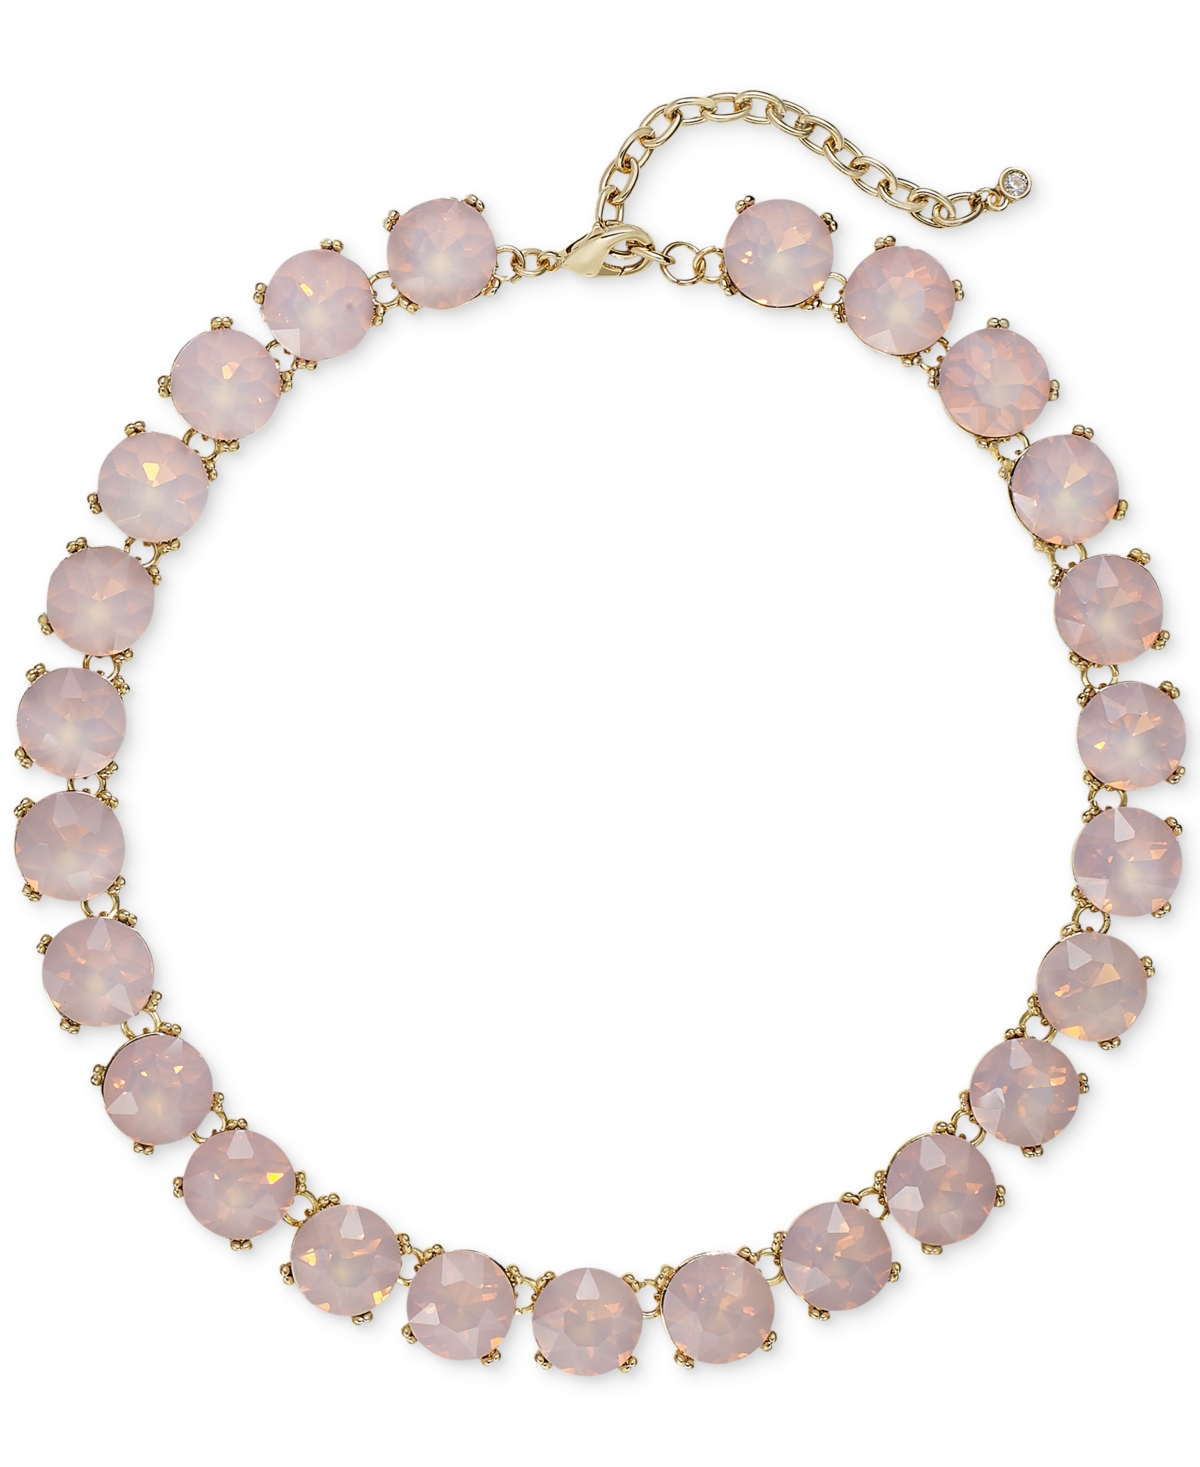 Gold-Tone Stone All-Around Necklace, 16" + 3" extender, Created for Macy's - Blue